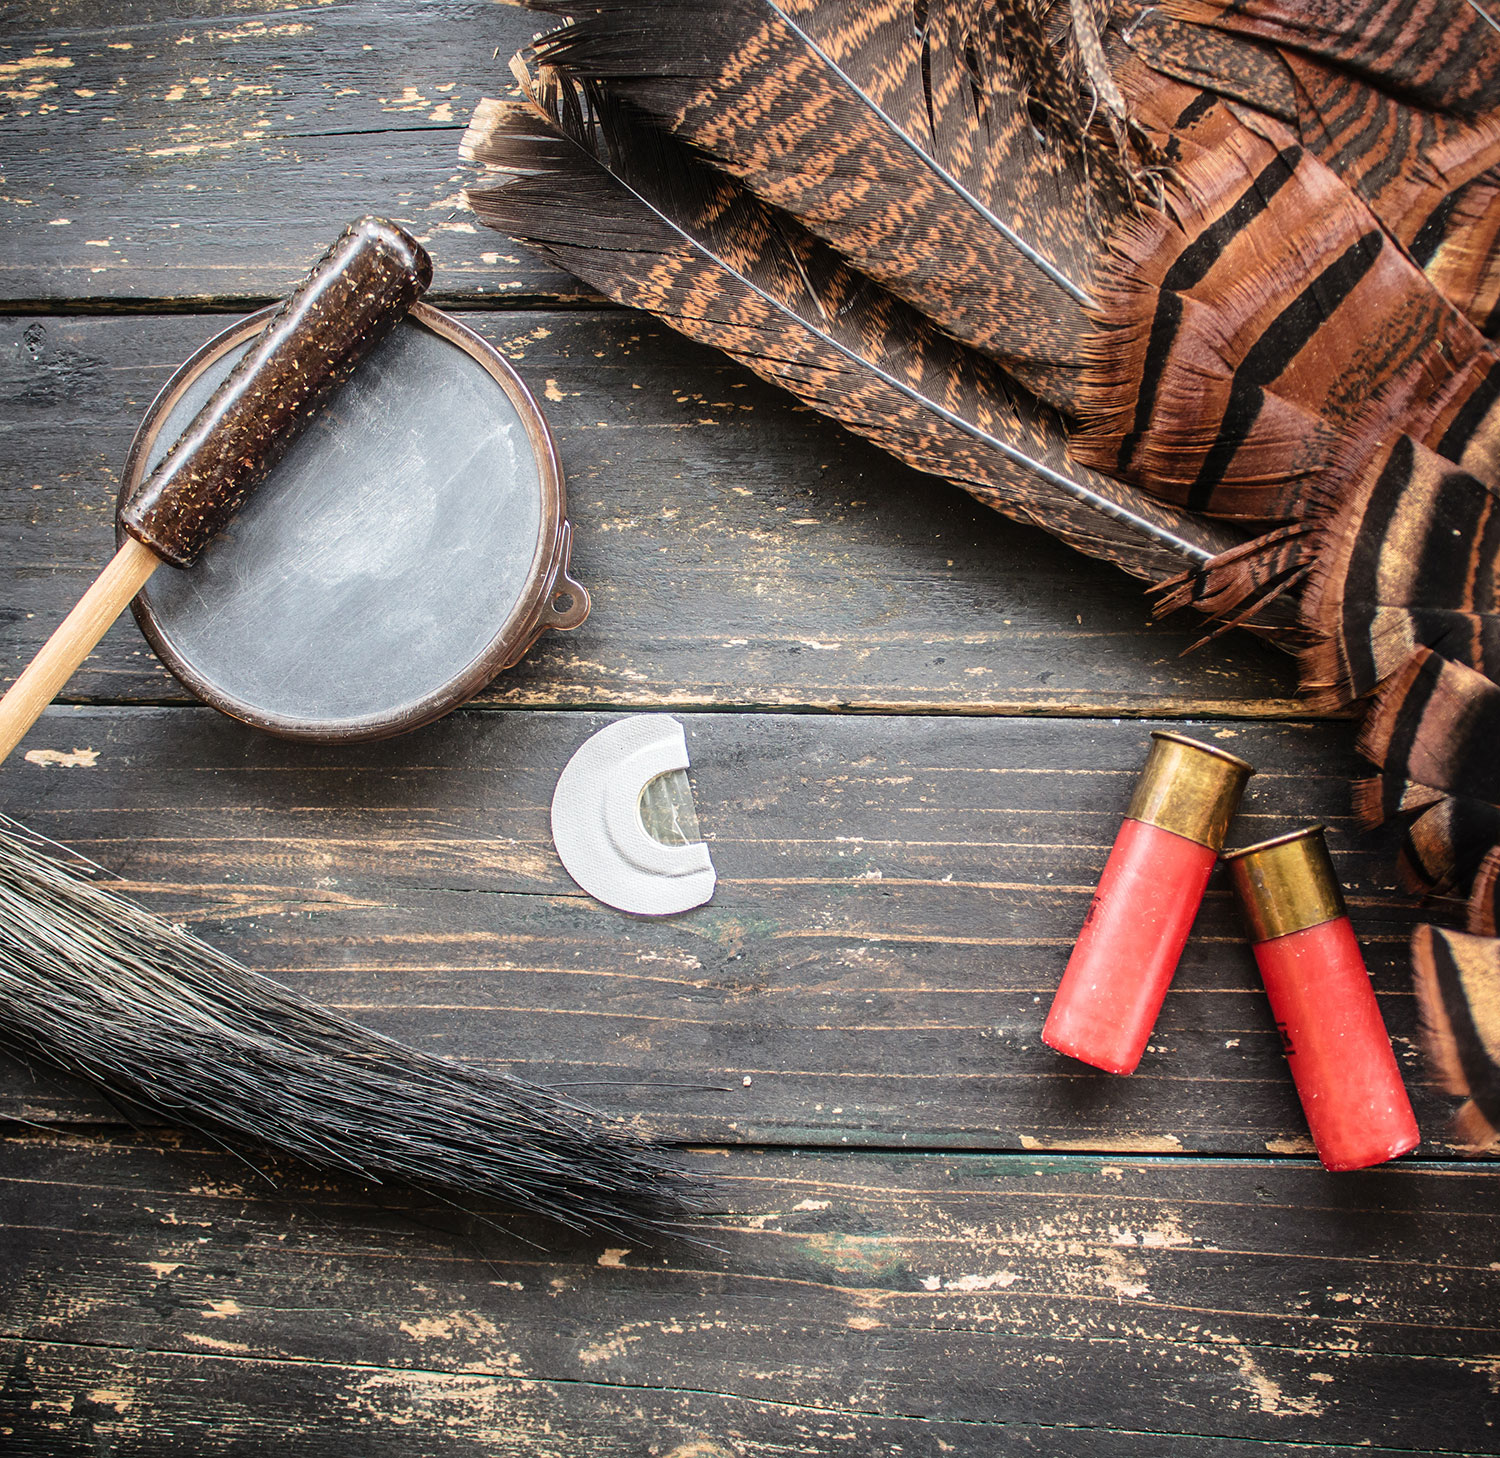 Some gear used by turkey hunters